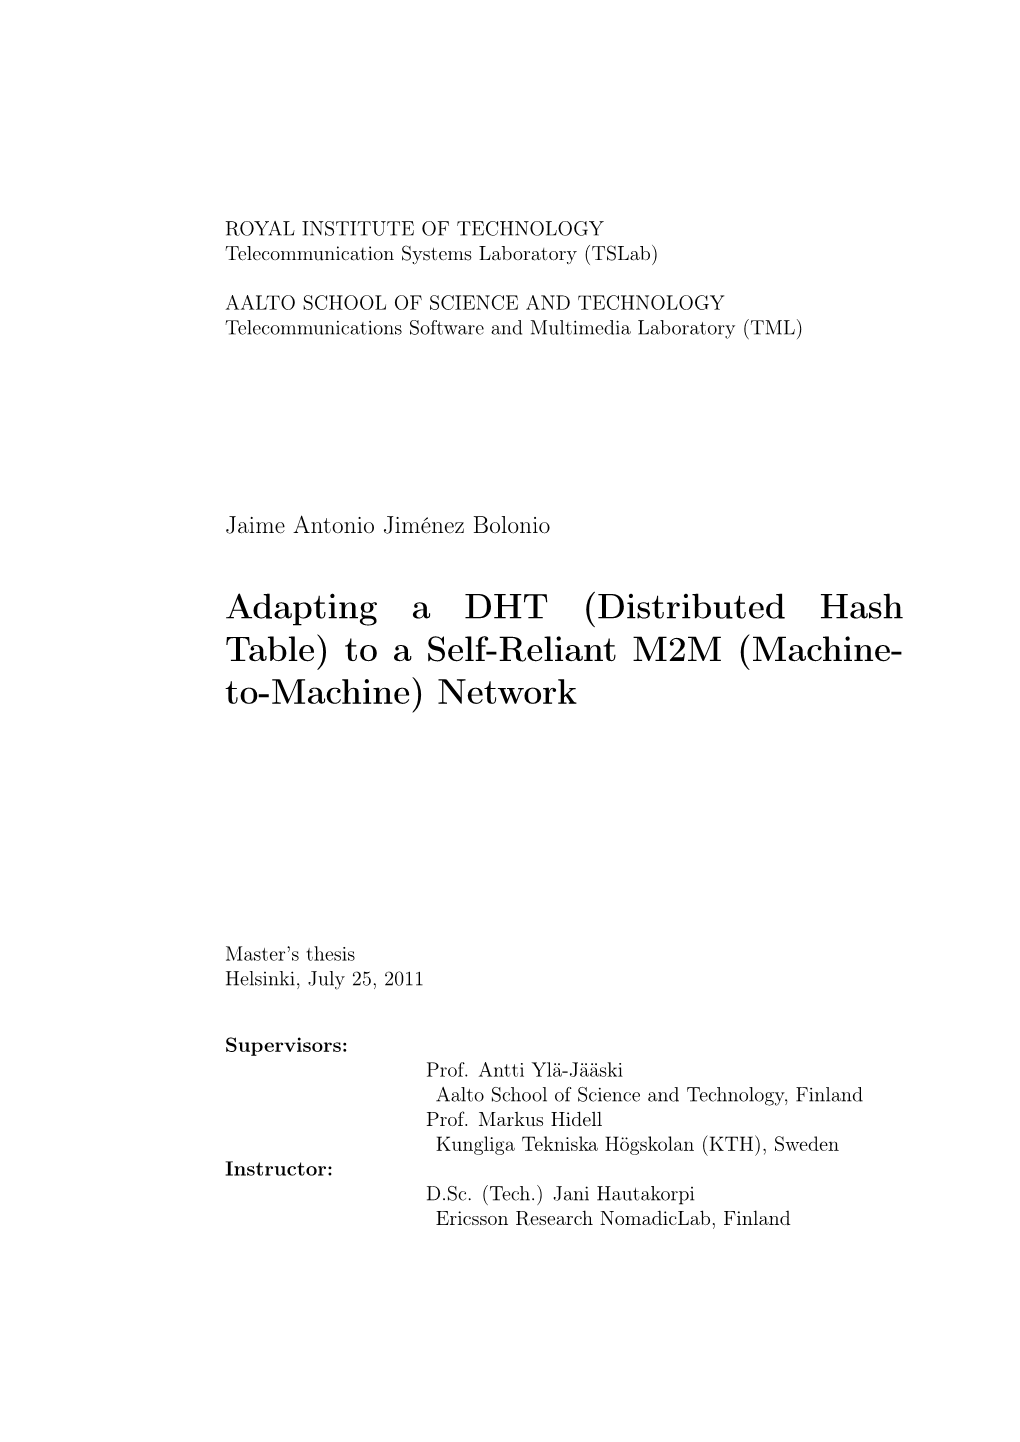 Distributed Hash Table) to a Self-Reliant M2M (Machine- To-Machine) Network